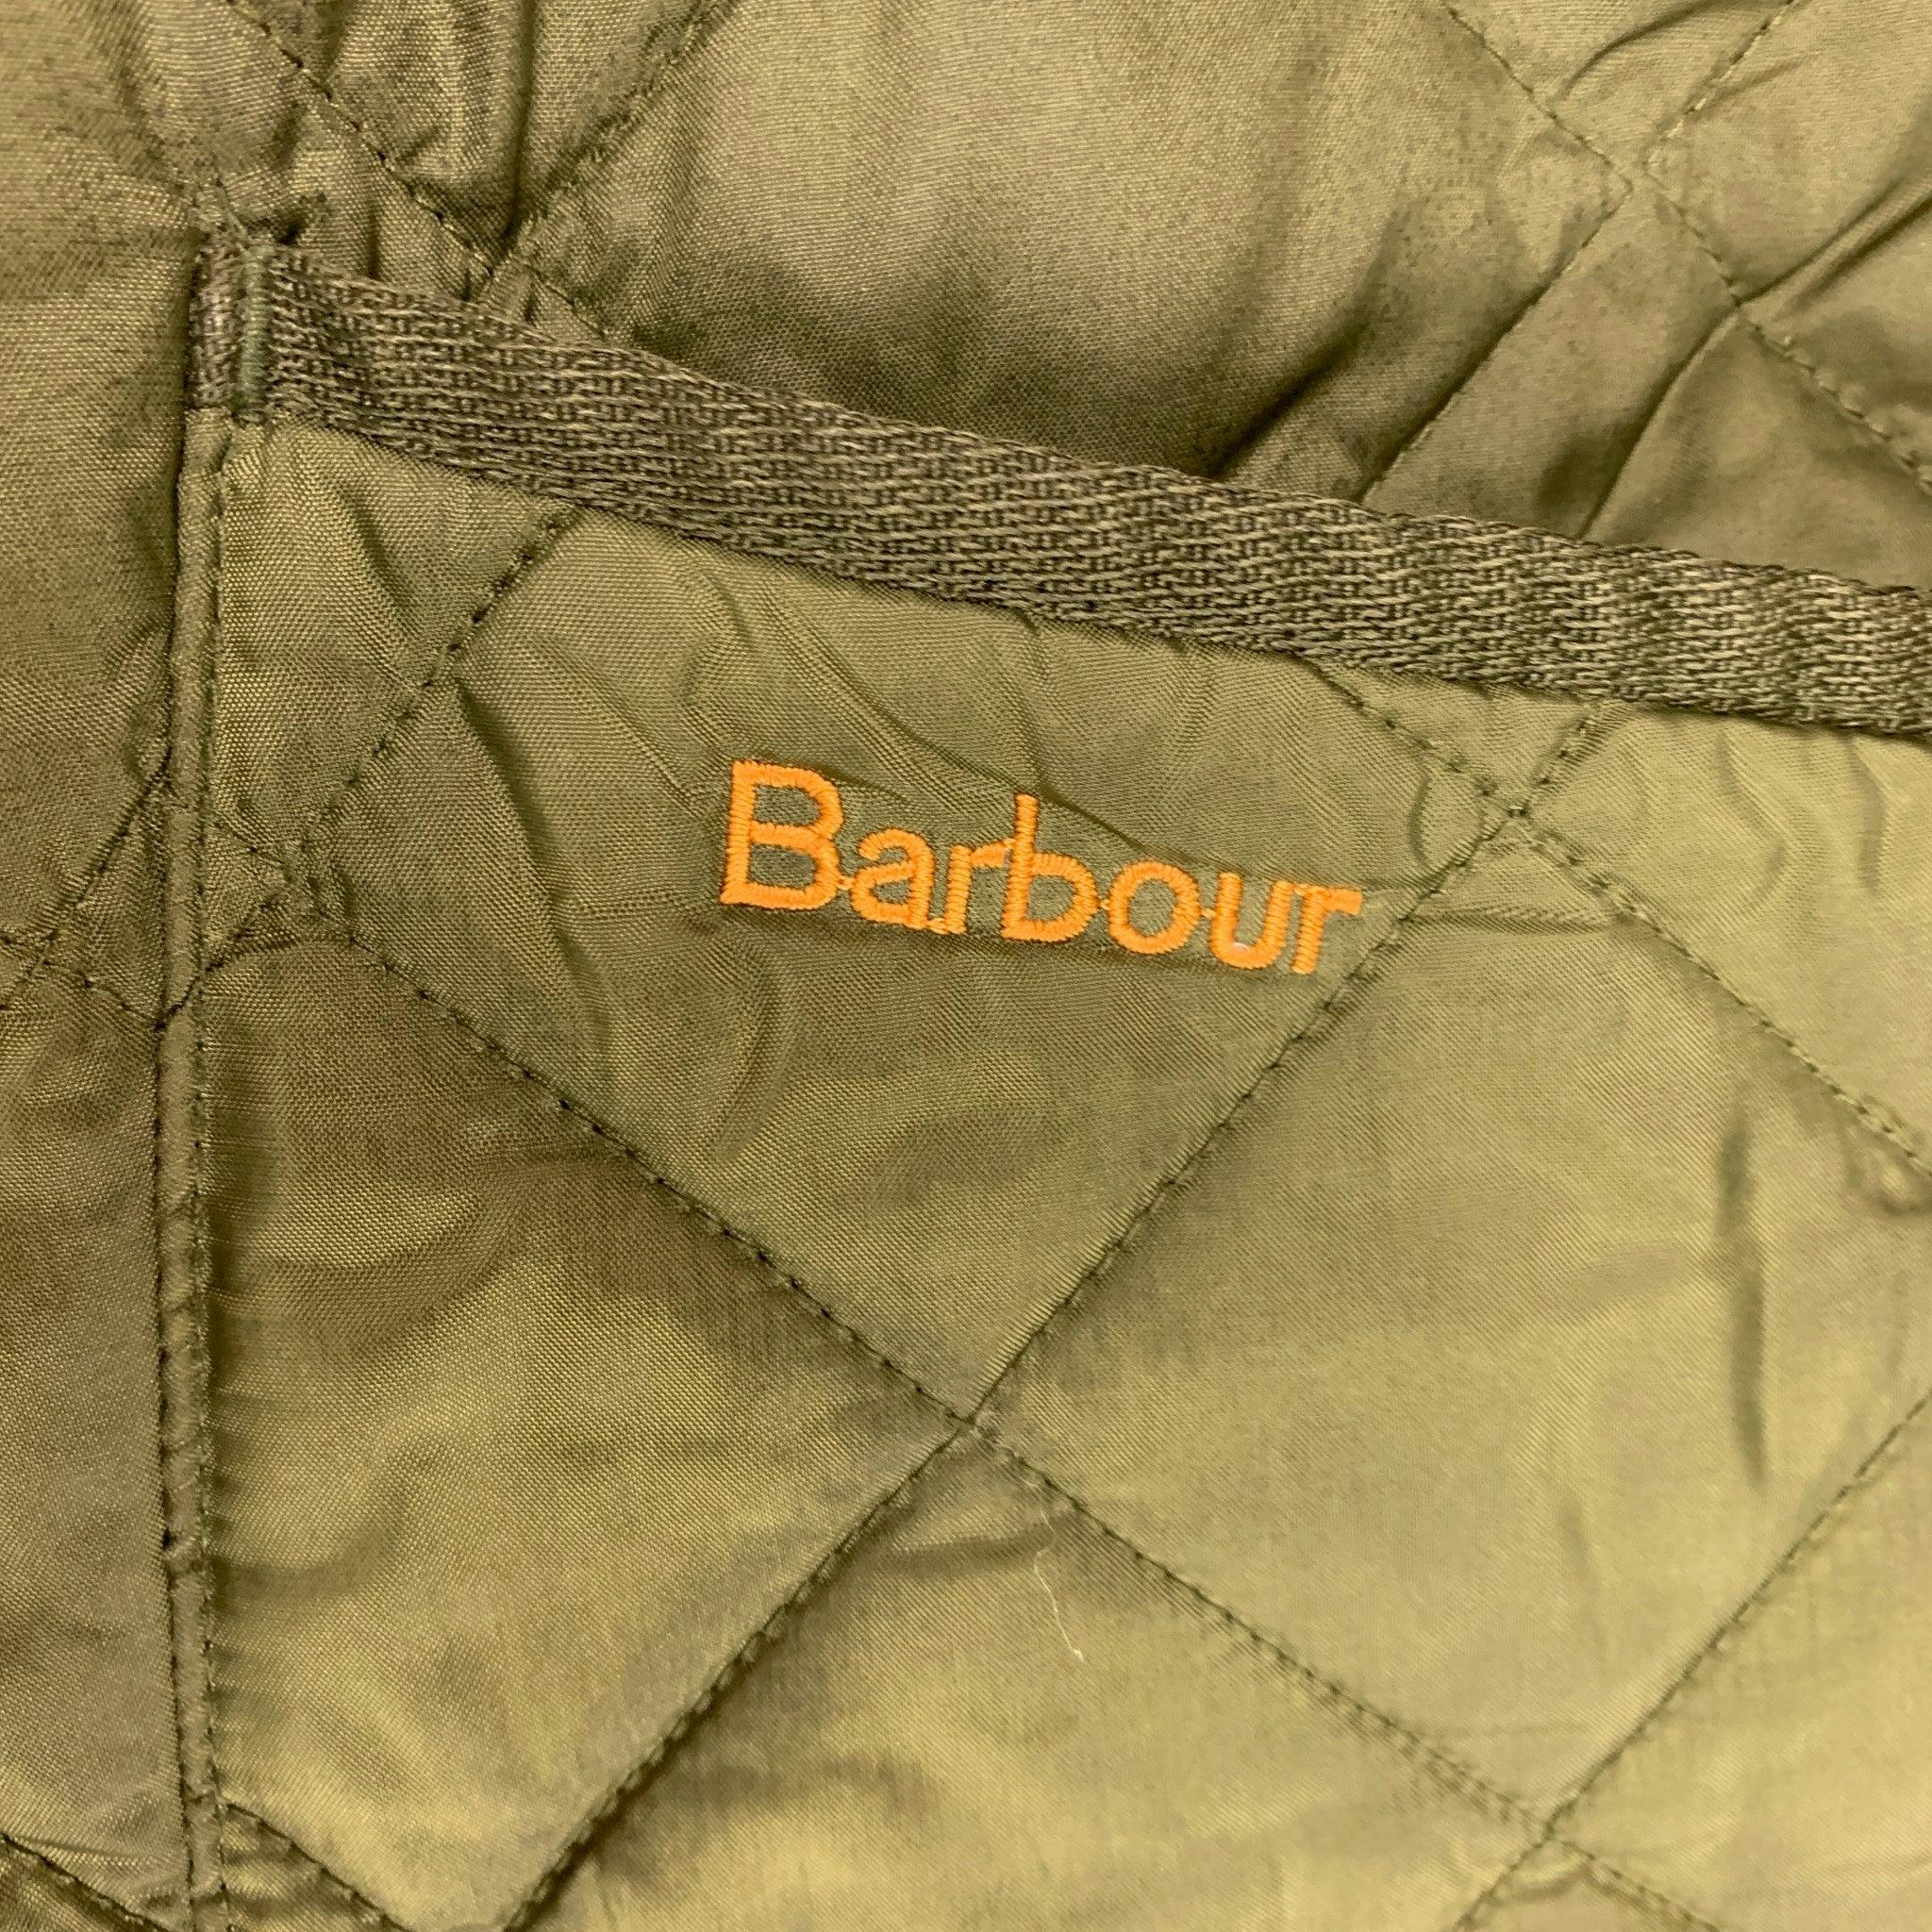 BARBOUR jacket comes in an olive green quilted polyamide, featuring a corduroy collar, front pockets, and a snap button closure. Very Good Pre-Owned Condition. 

Marked:   S 

Measurements: 
 
Shoulder: 19.5 inches Bust: 44 inches Sleeve: 24 inches